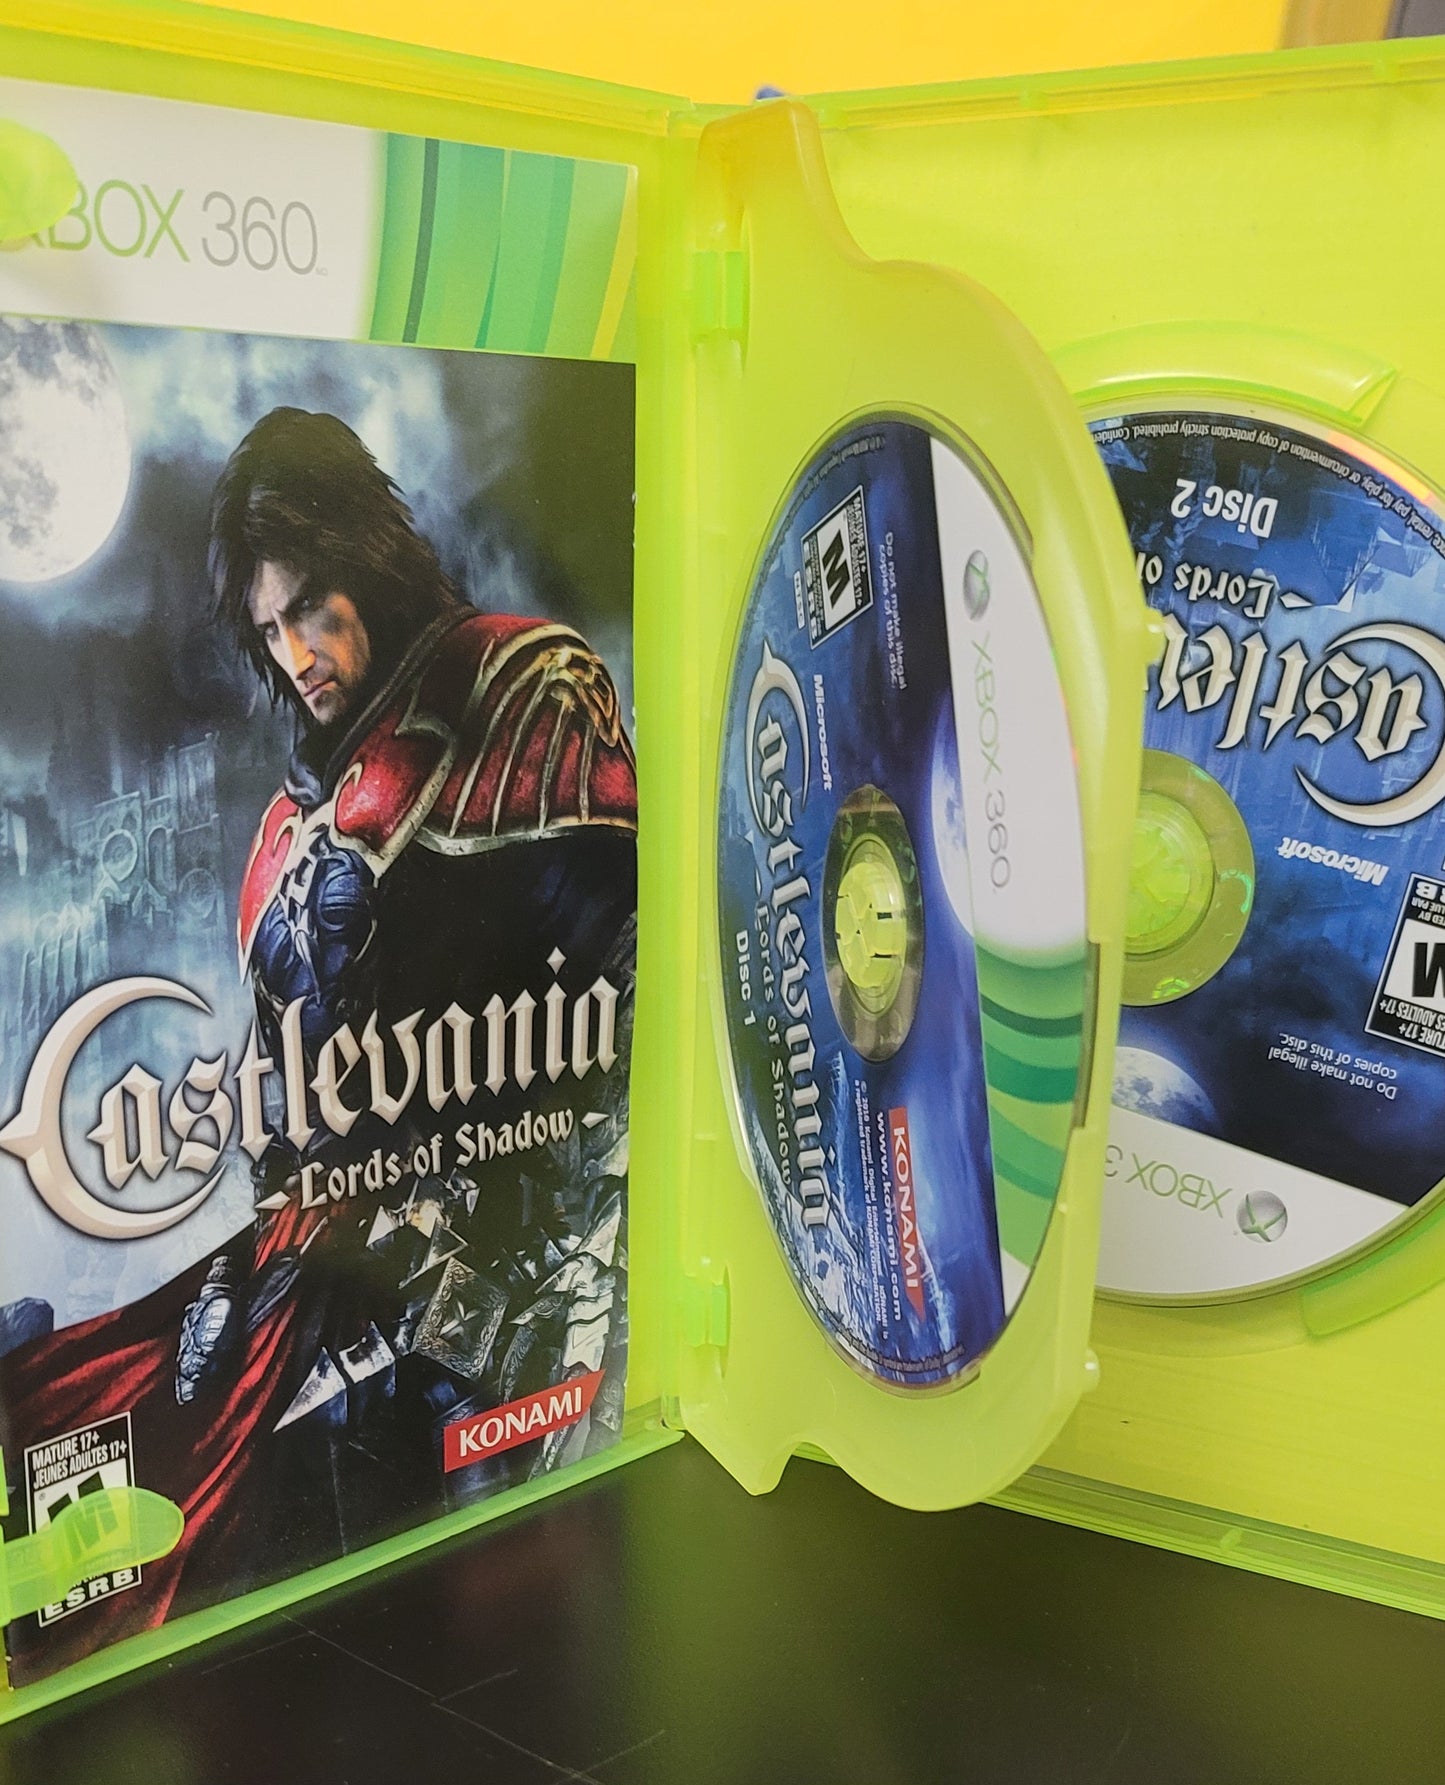 Castlevania Lords of Shadow - Xb360 - Used